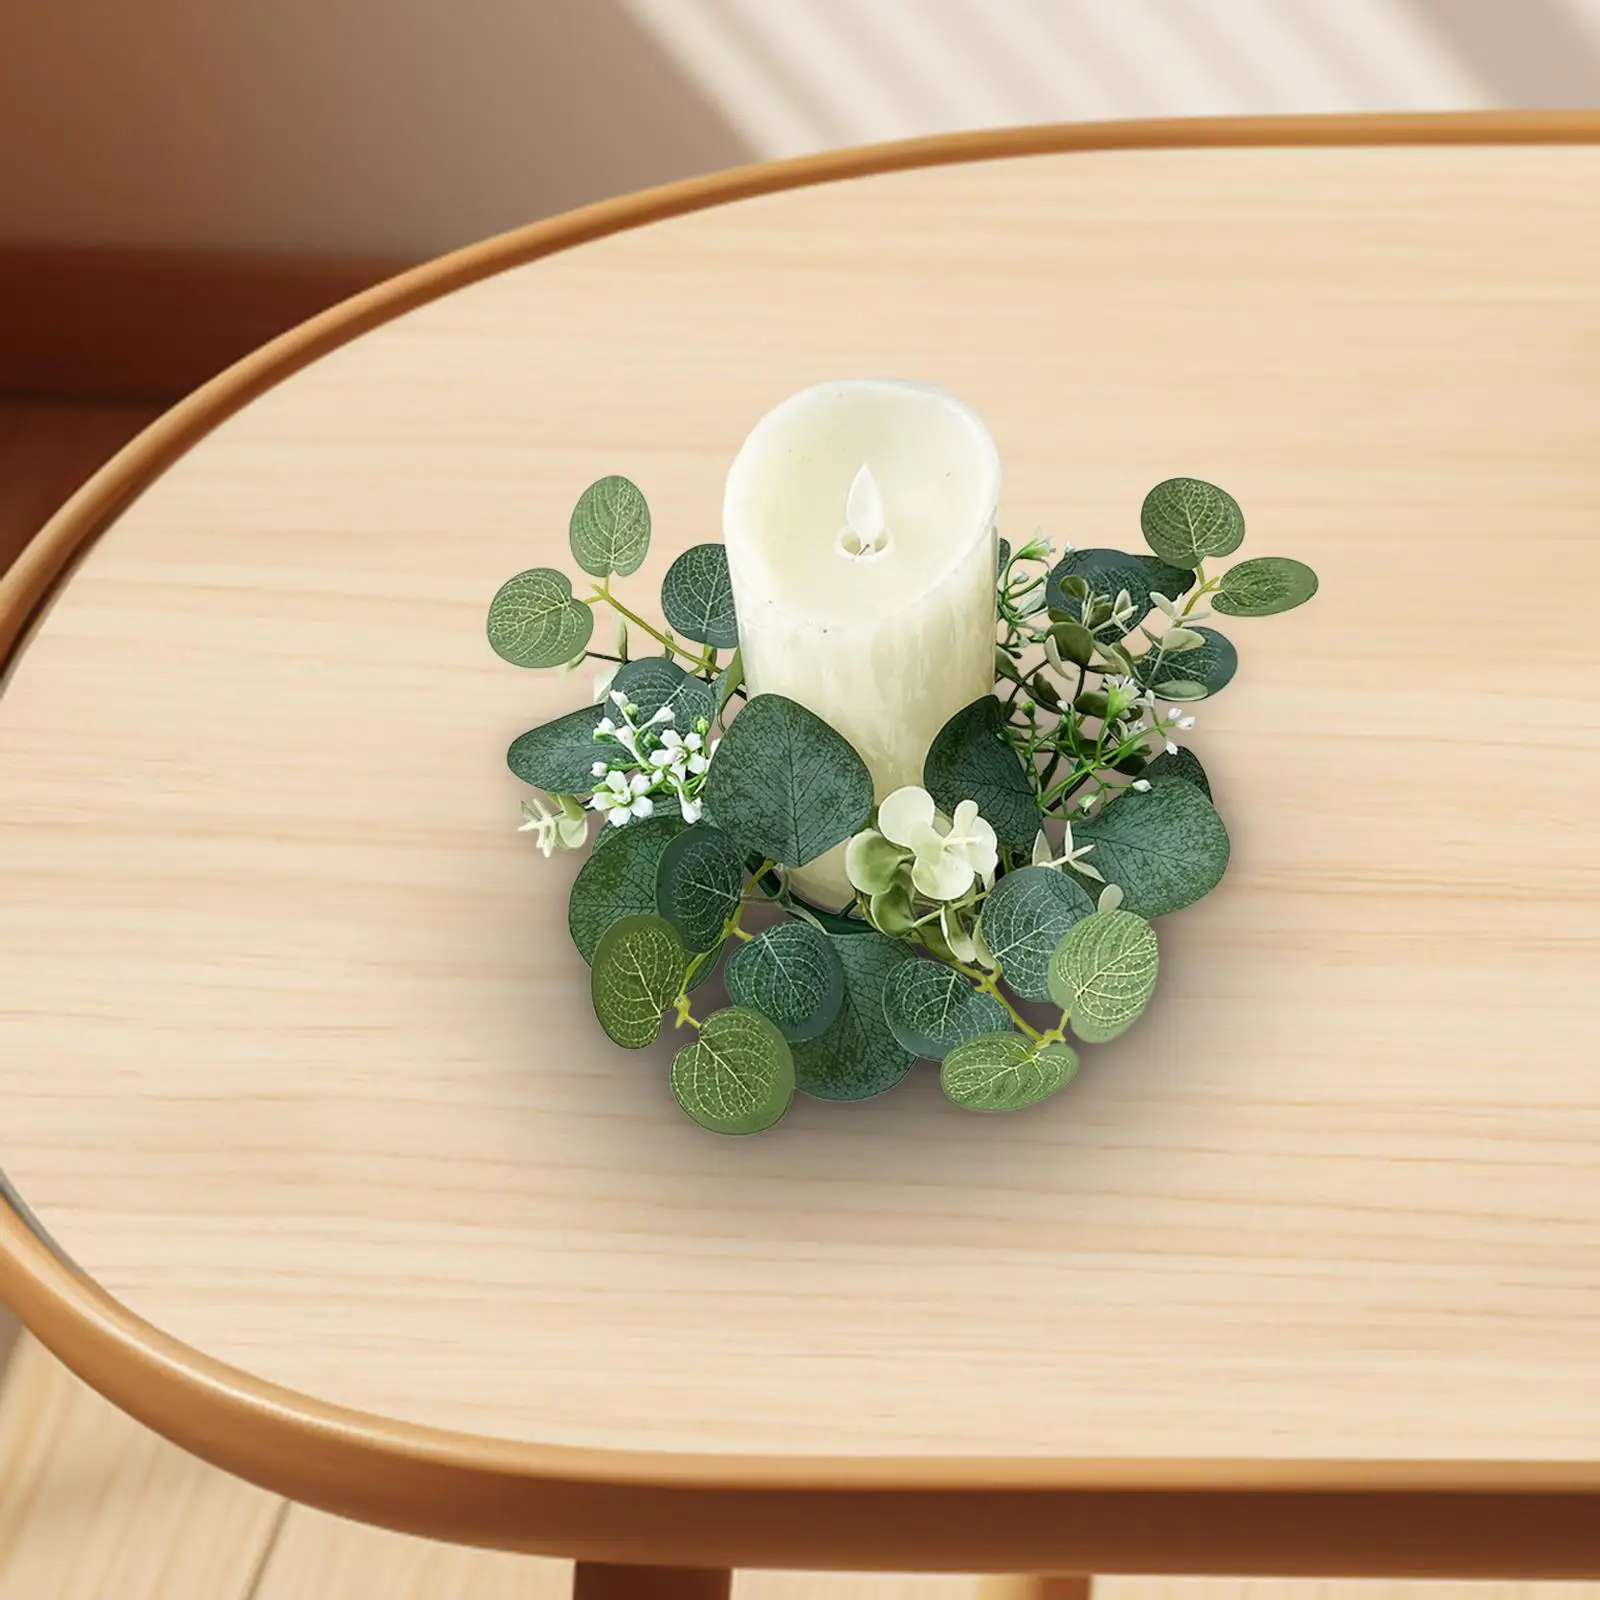 Candle Ring Decoration Greenery Garland Artificial Eucalyptus Leaves Wreath for Dining Room Wedding Festival Kitchen Tabletop